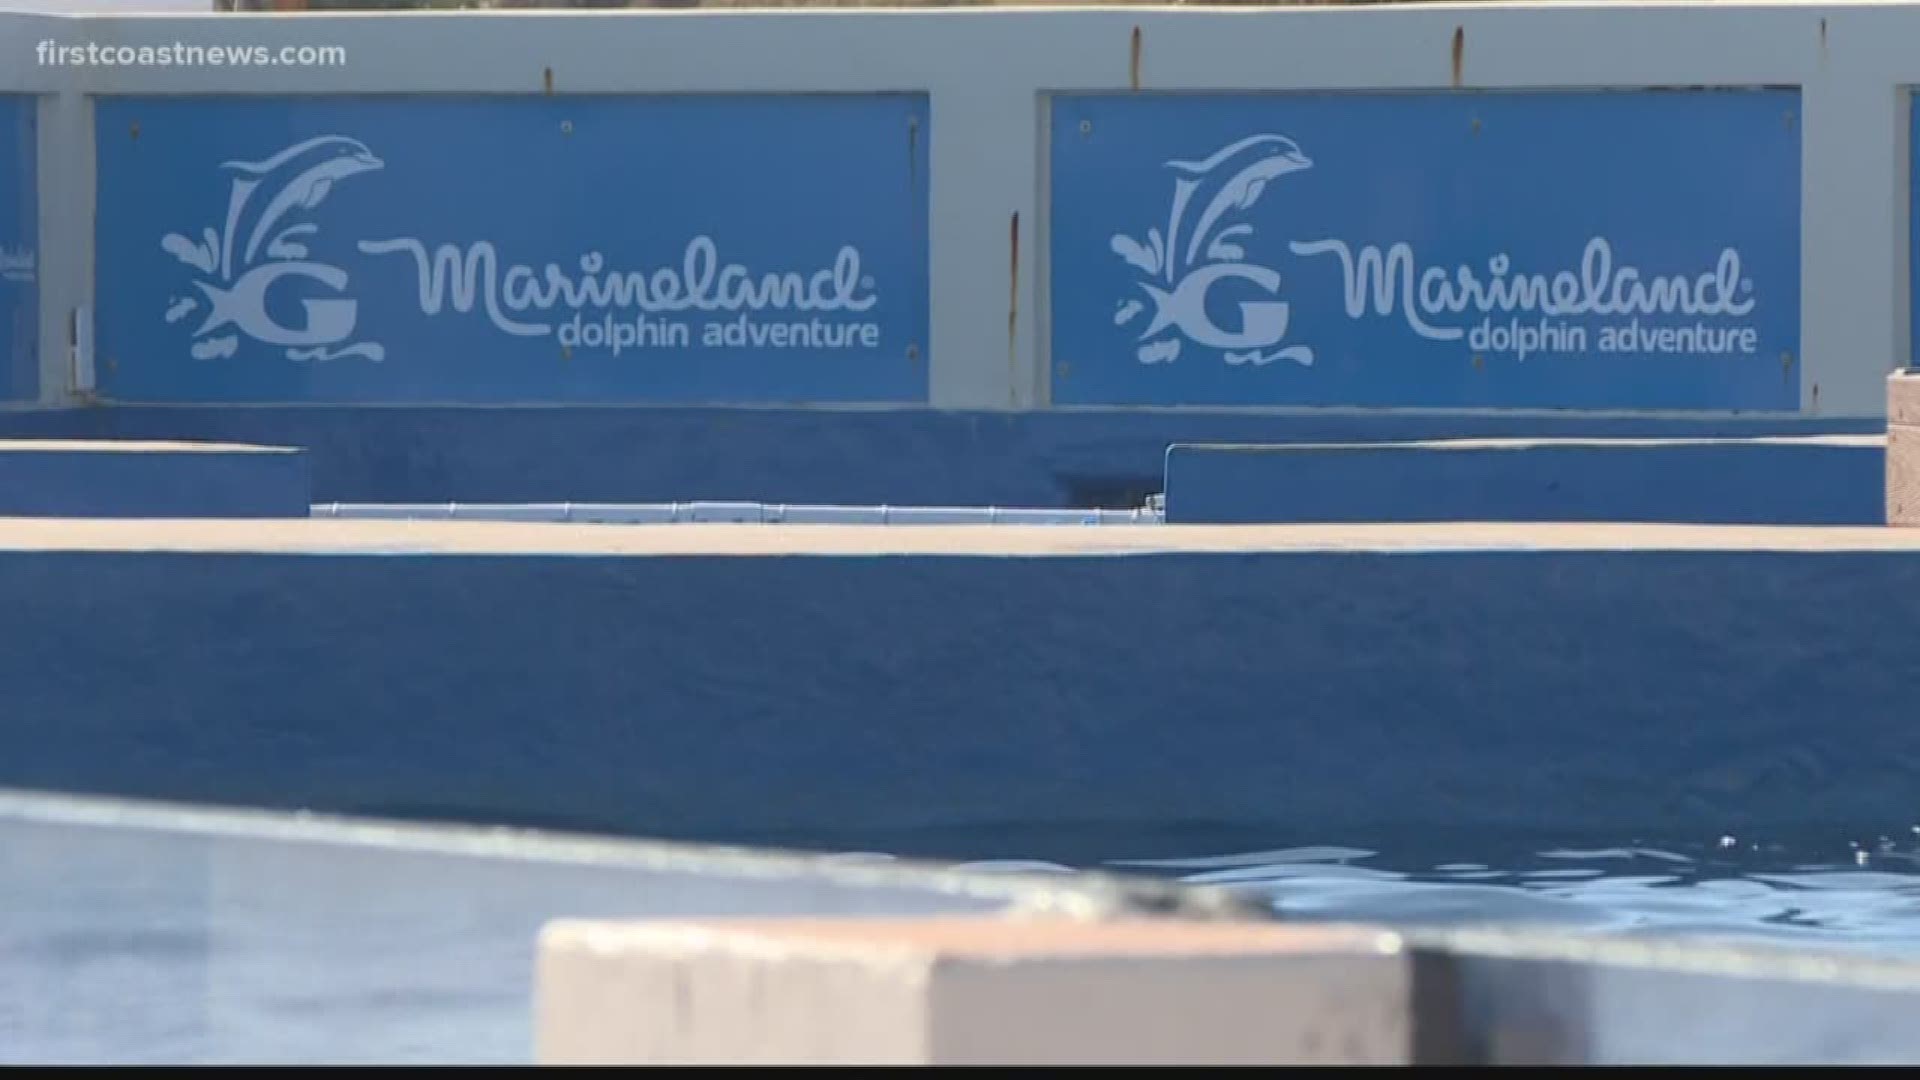 Marineland is now owned by Dolphin Discovery, which is based in Mexico. There are a few changes but Marineland's message of education and conservation remains.